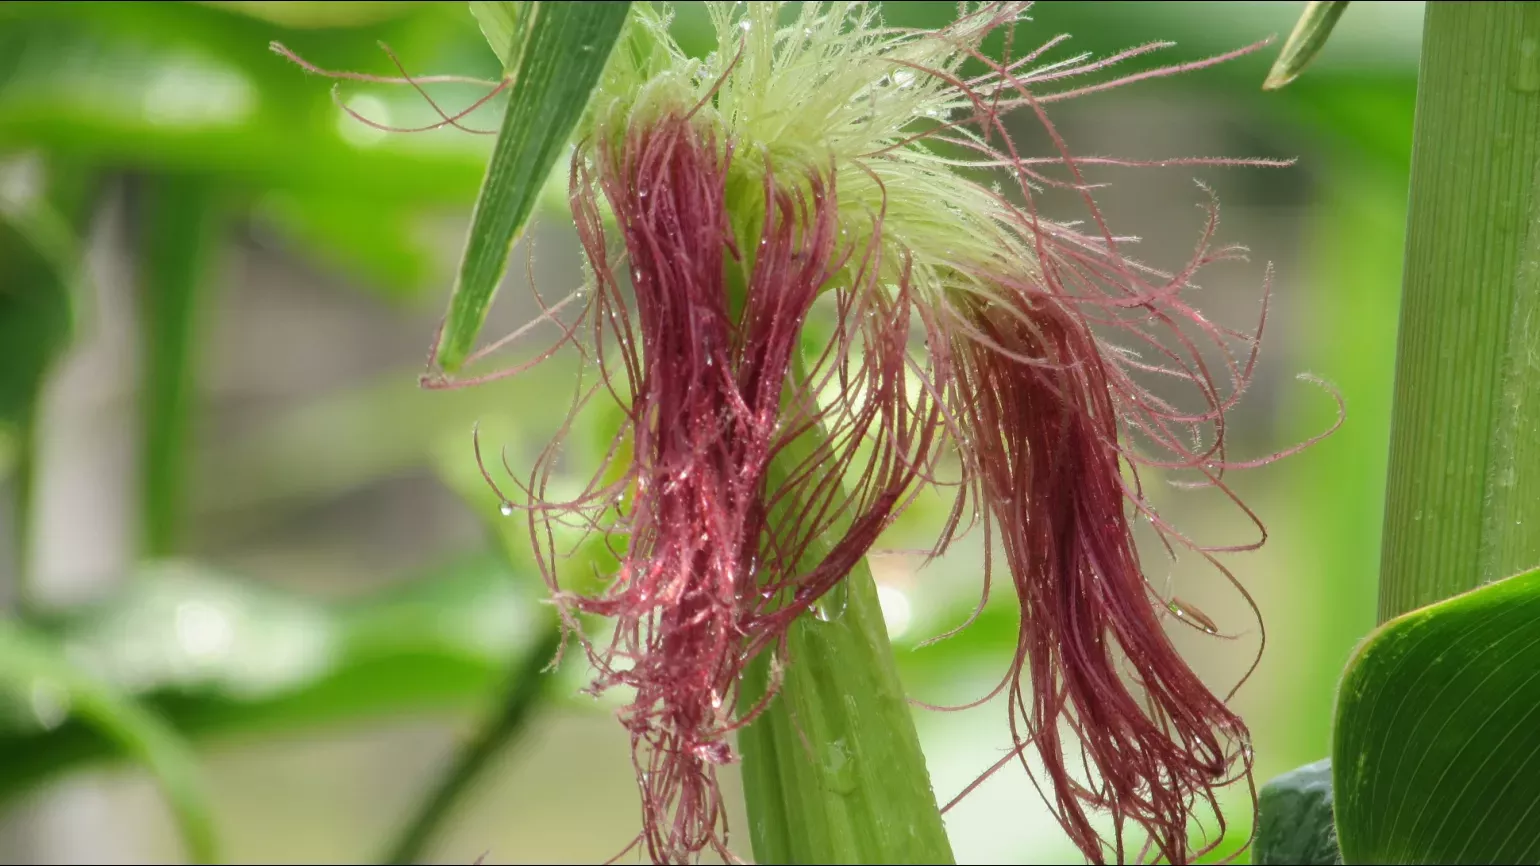 Red silk like strands growing from a green maize plant